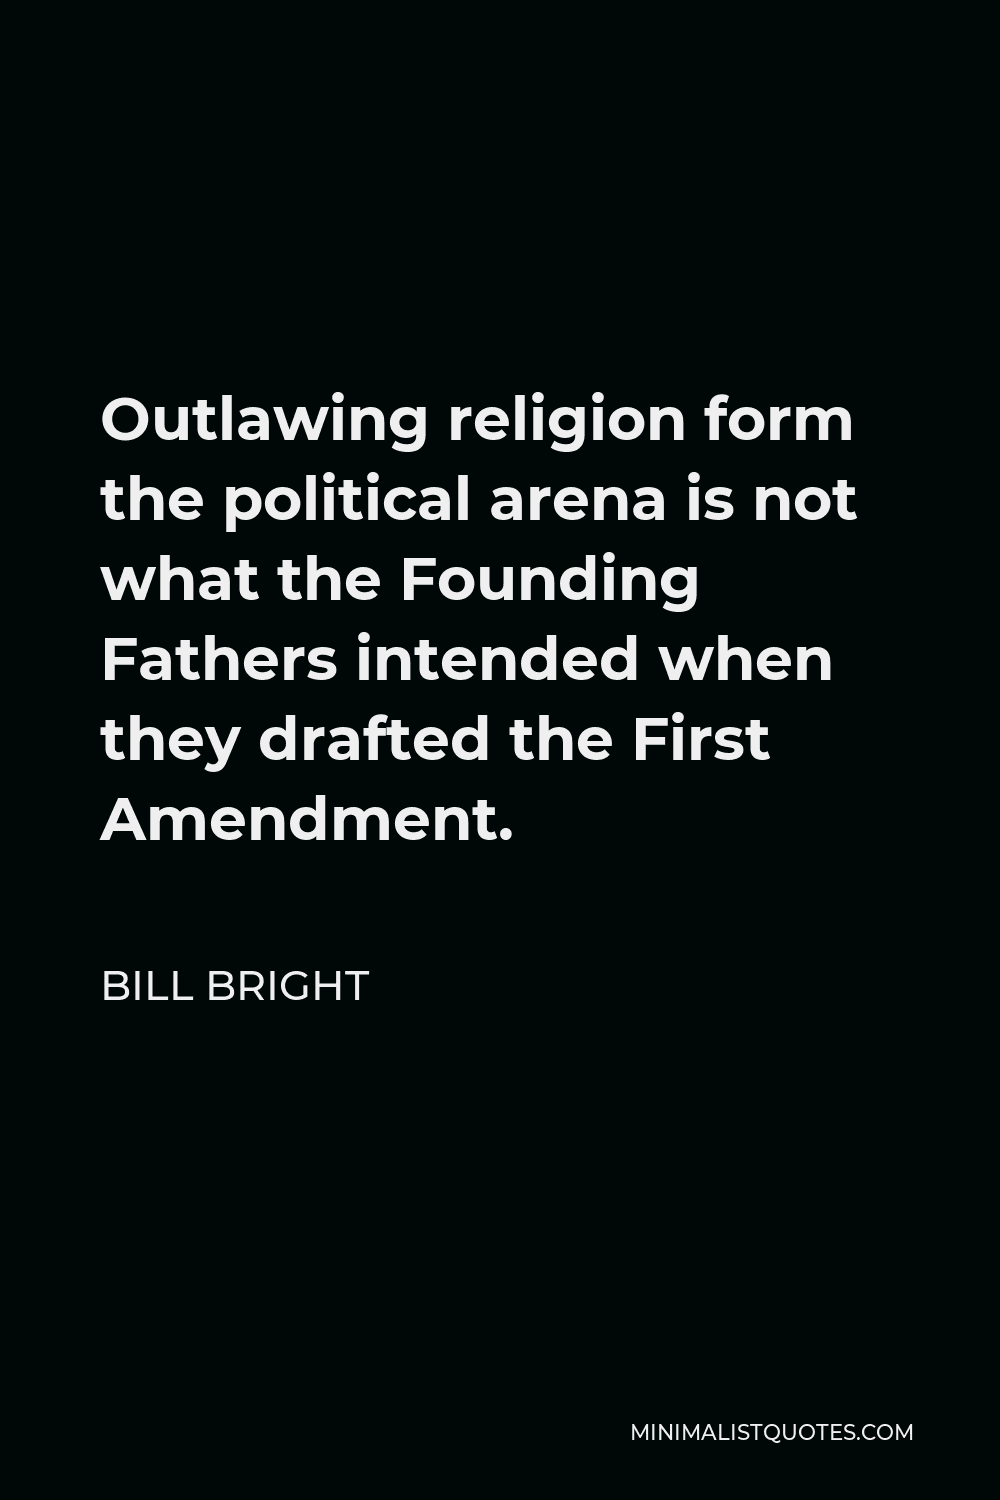 Bill Bright Quote - Outlawing religion form the political arena is not what the Founding Fathers intended when they drafted the First Amendment.